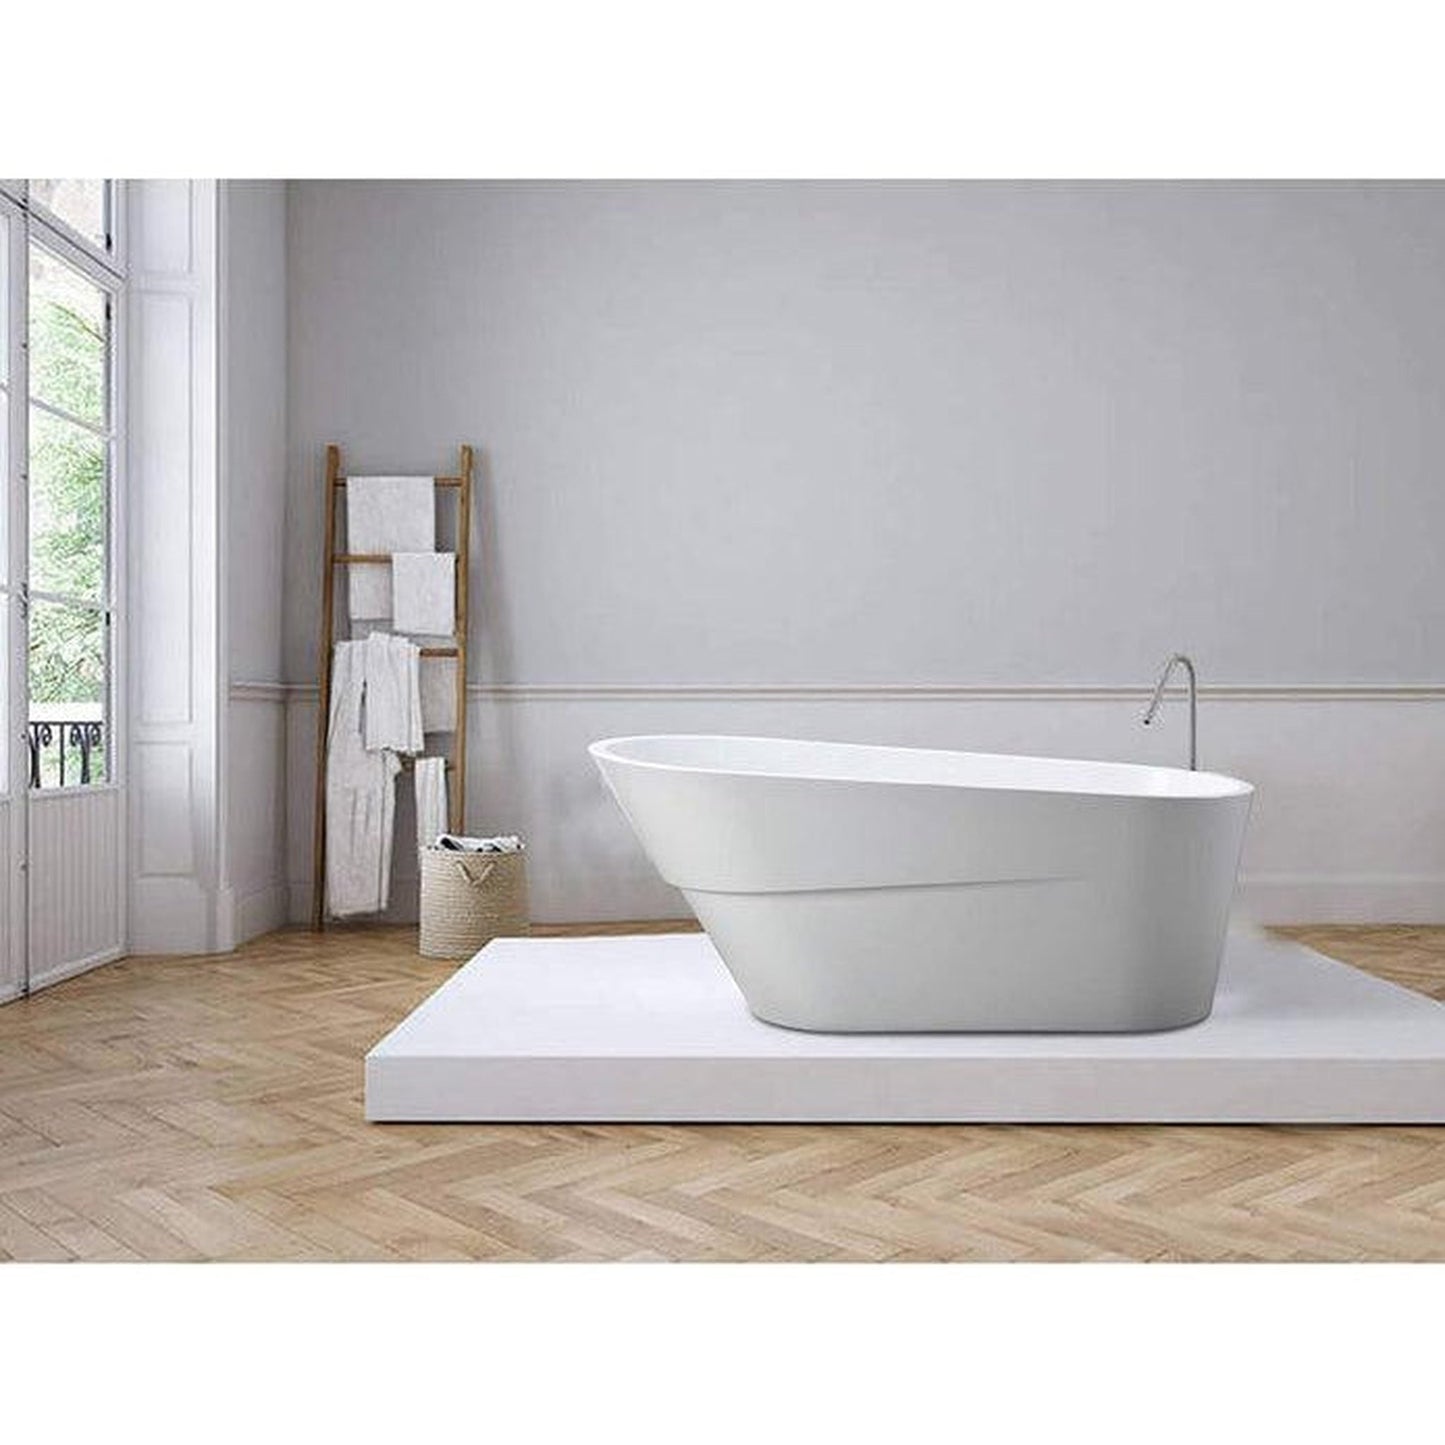 Vanity Art 67" White Acrylic Freestanding Bathtub With Polished Chrome Pop-up Drain, Slotted Overflow and Flexible Drain Hose